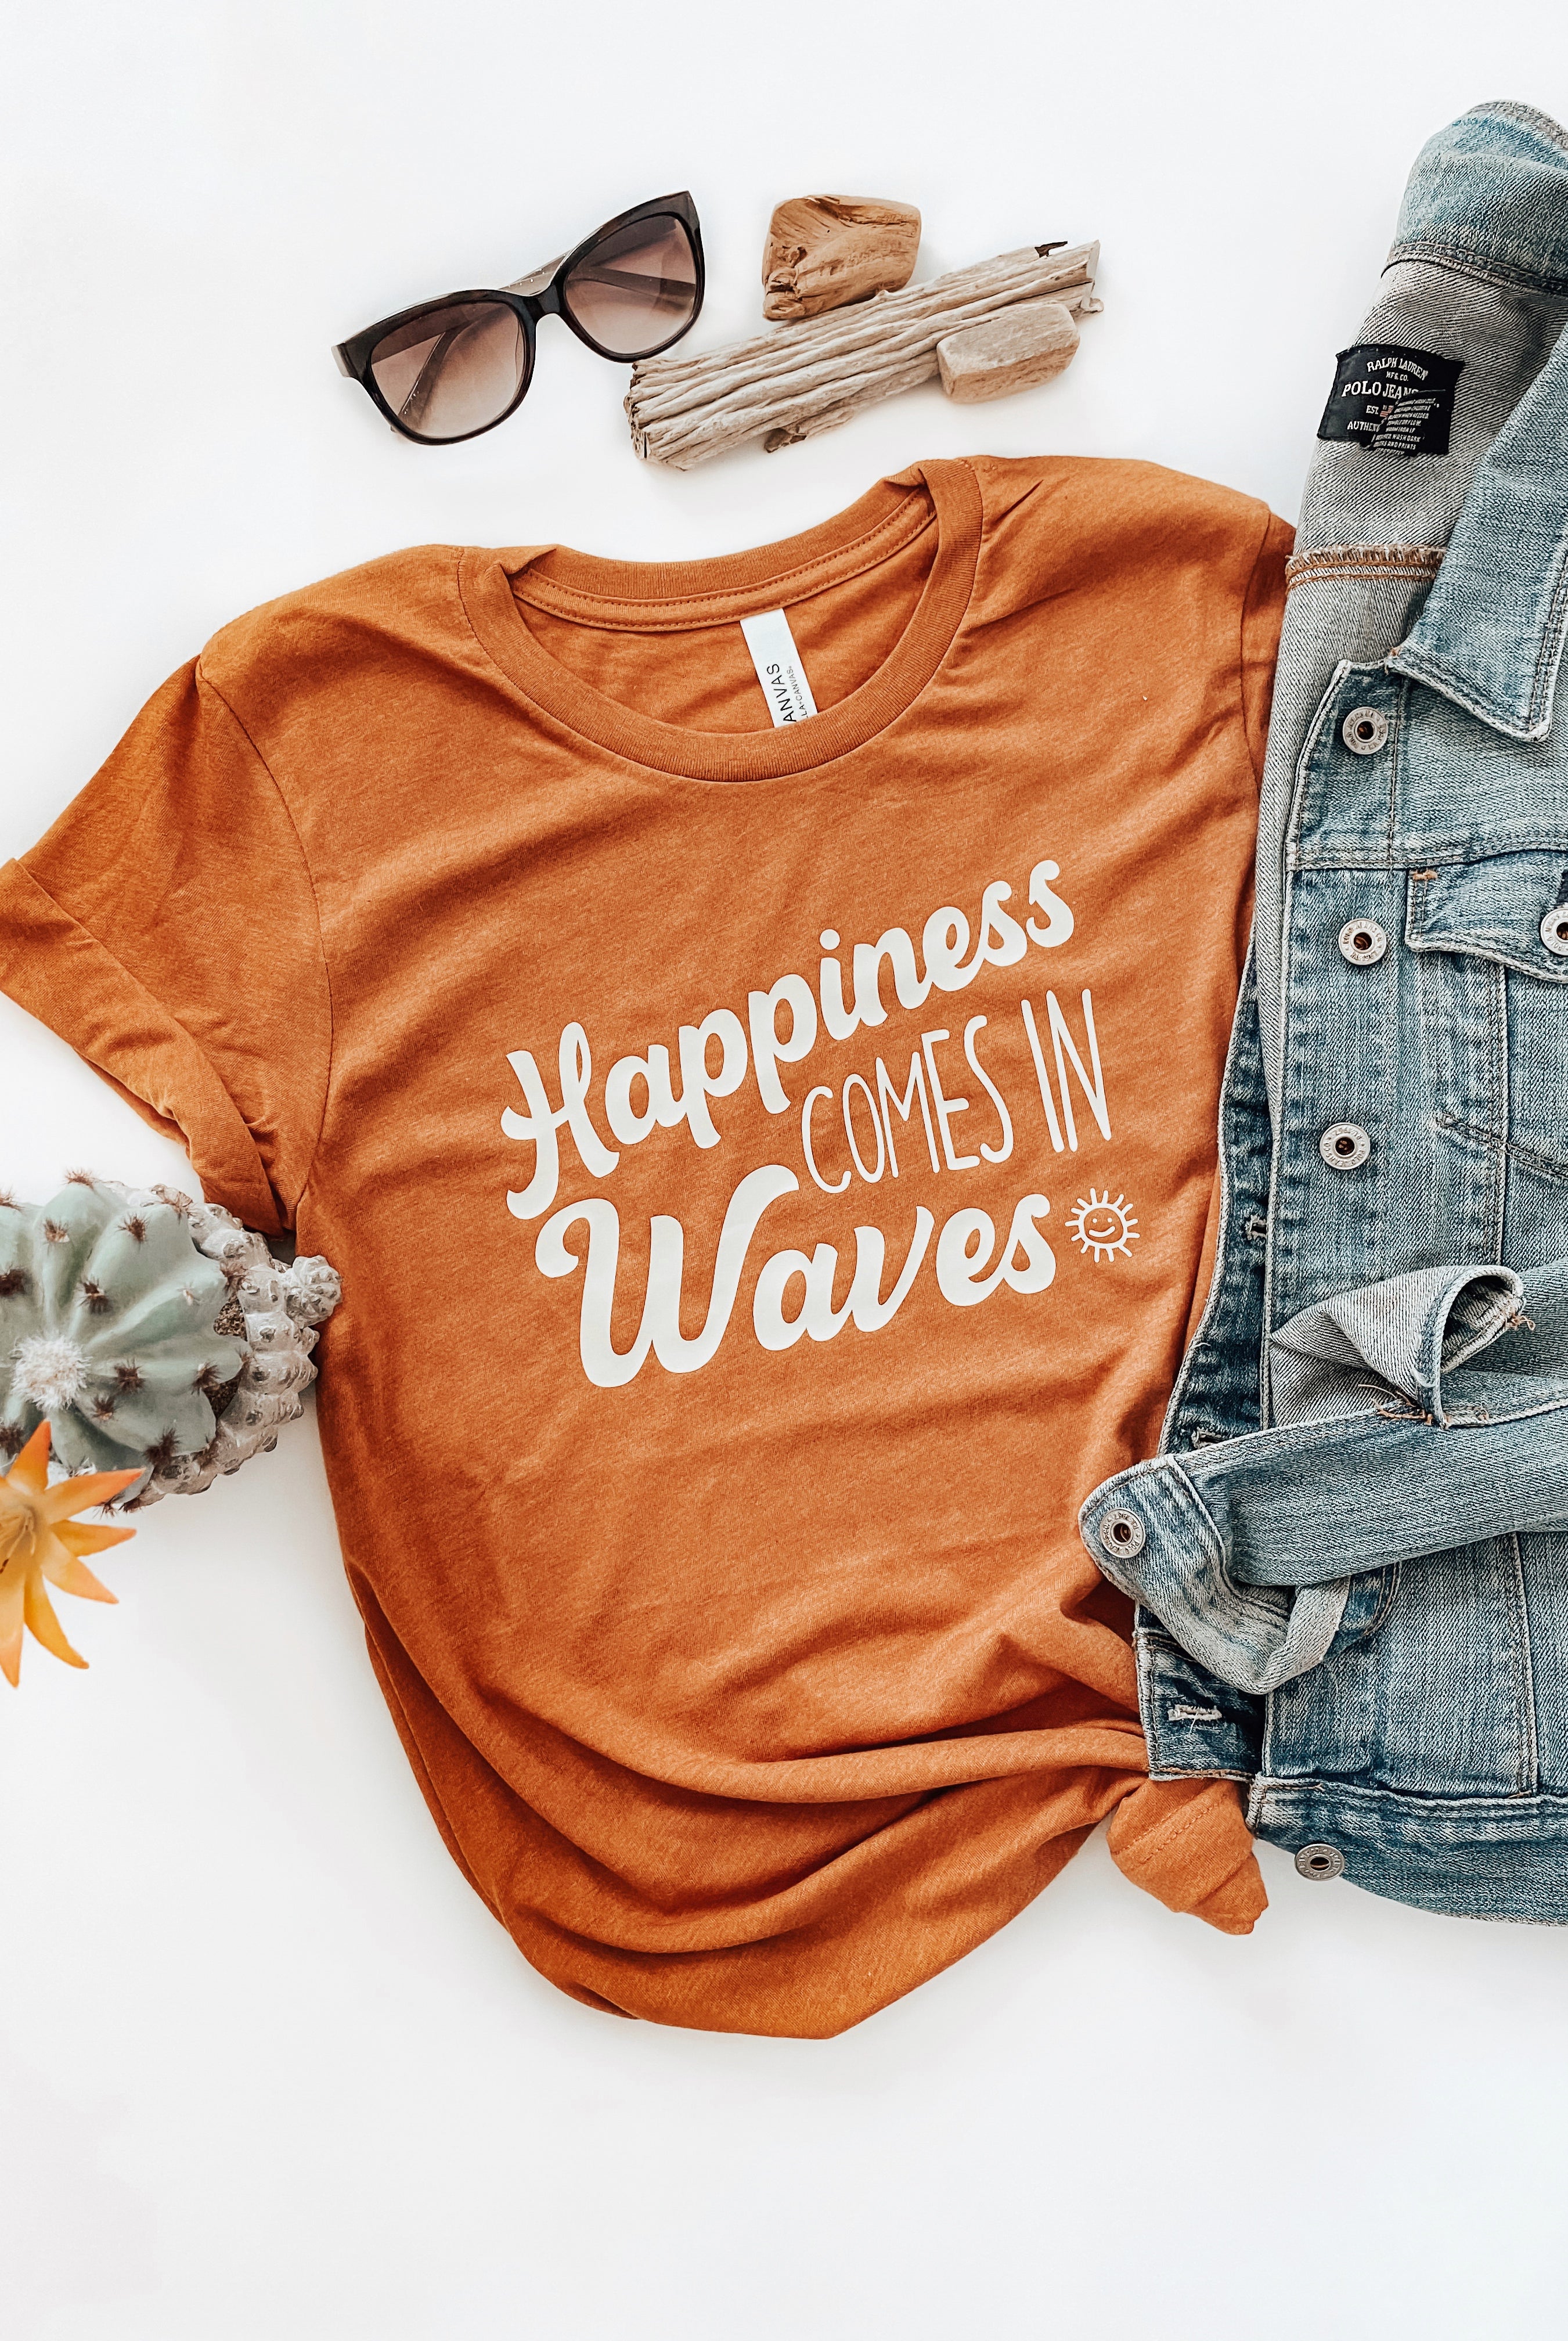 Happiness come in Waves. Beach summer girl shirt. Ocean beach apparel graphic tee. Bella and Canvas. Clay colored tee.